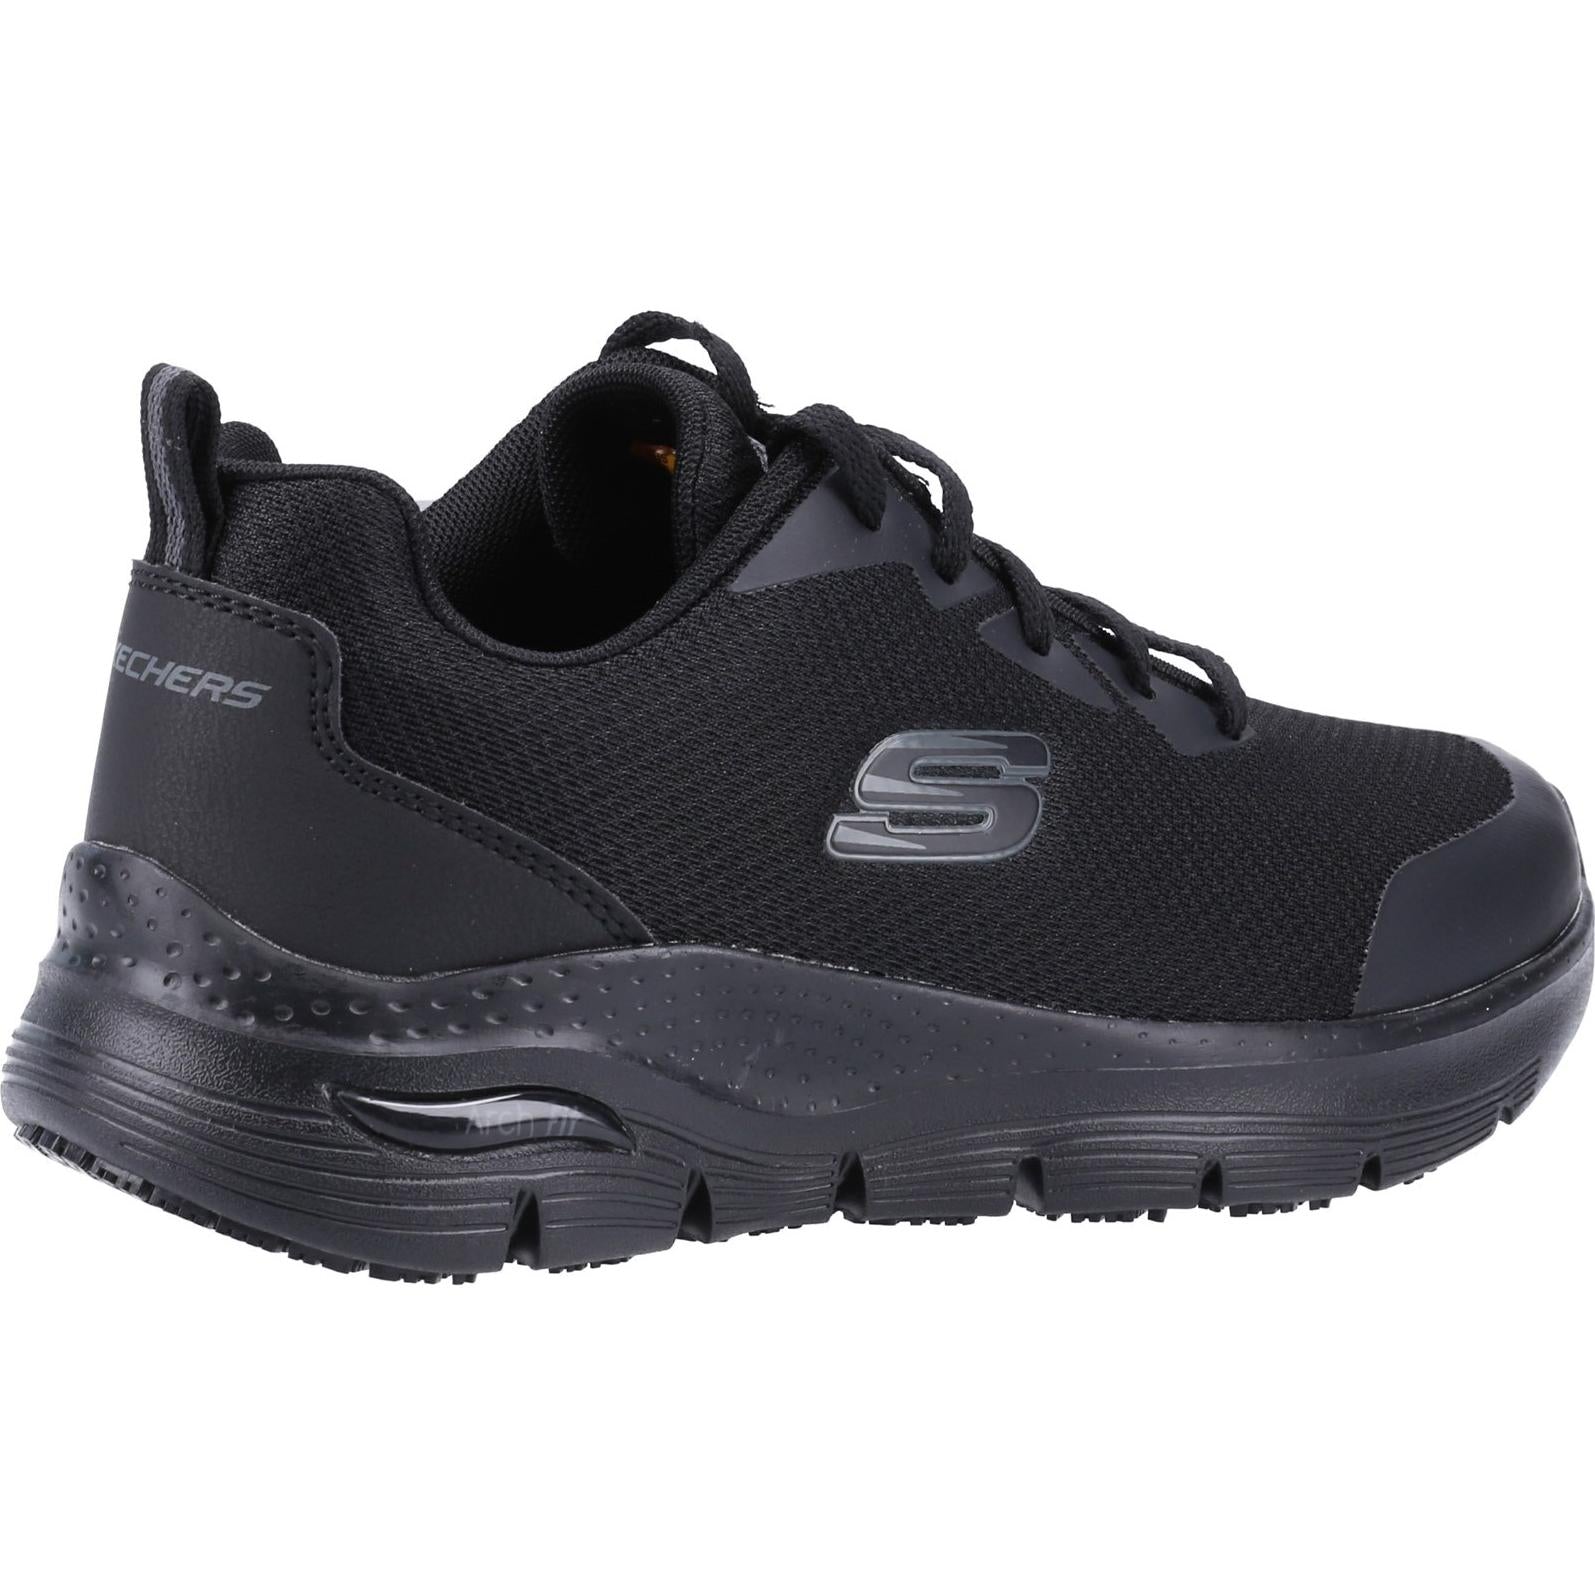 Skechers Arch Fit Sr Occupational Shoes